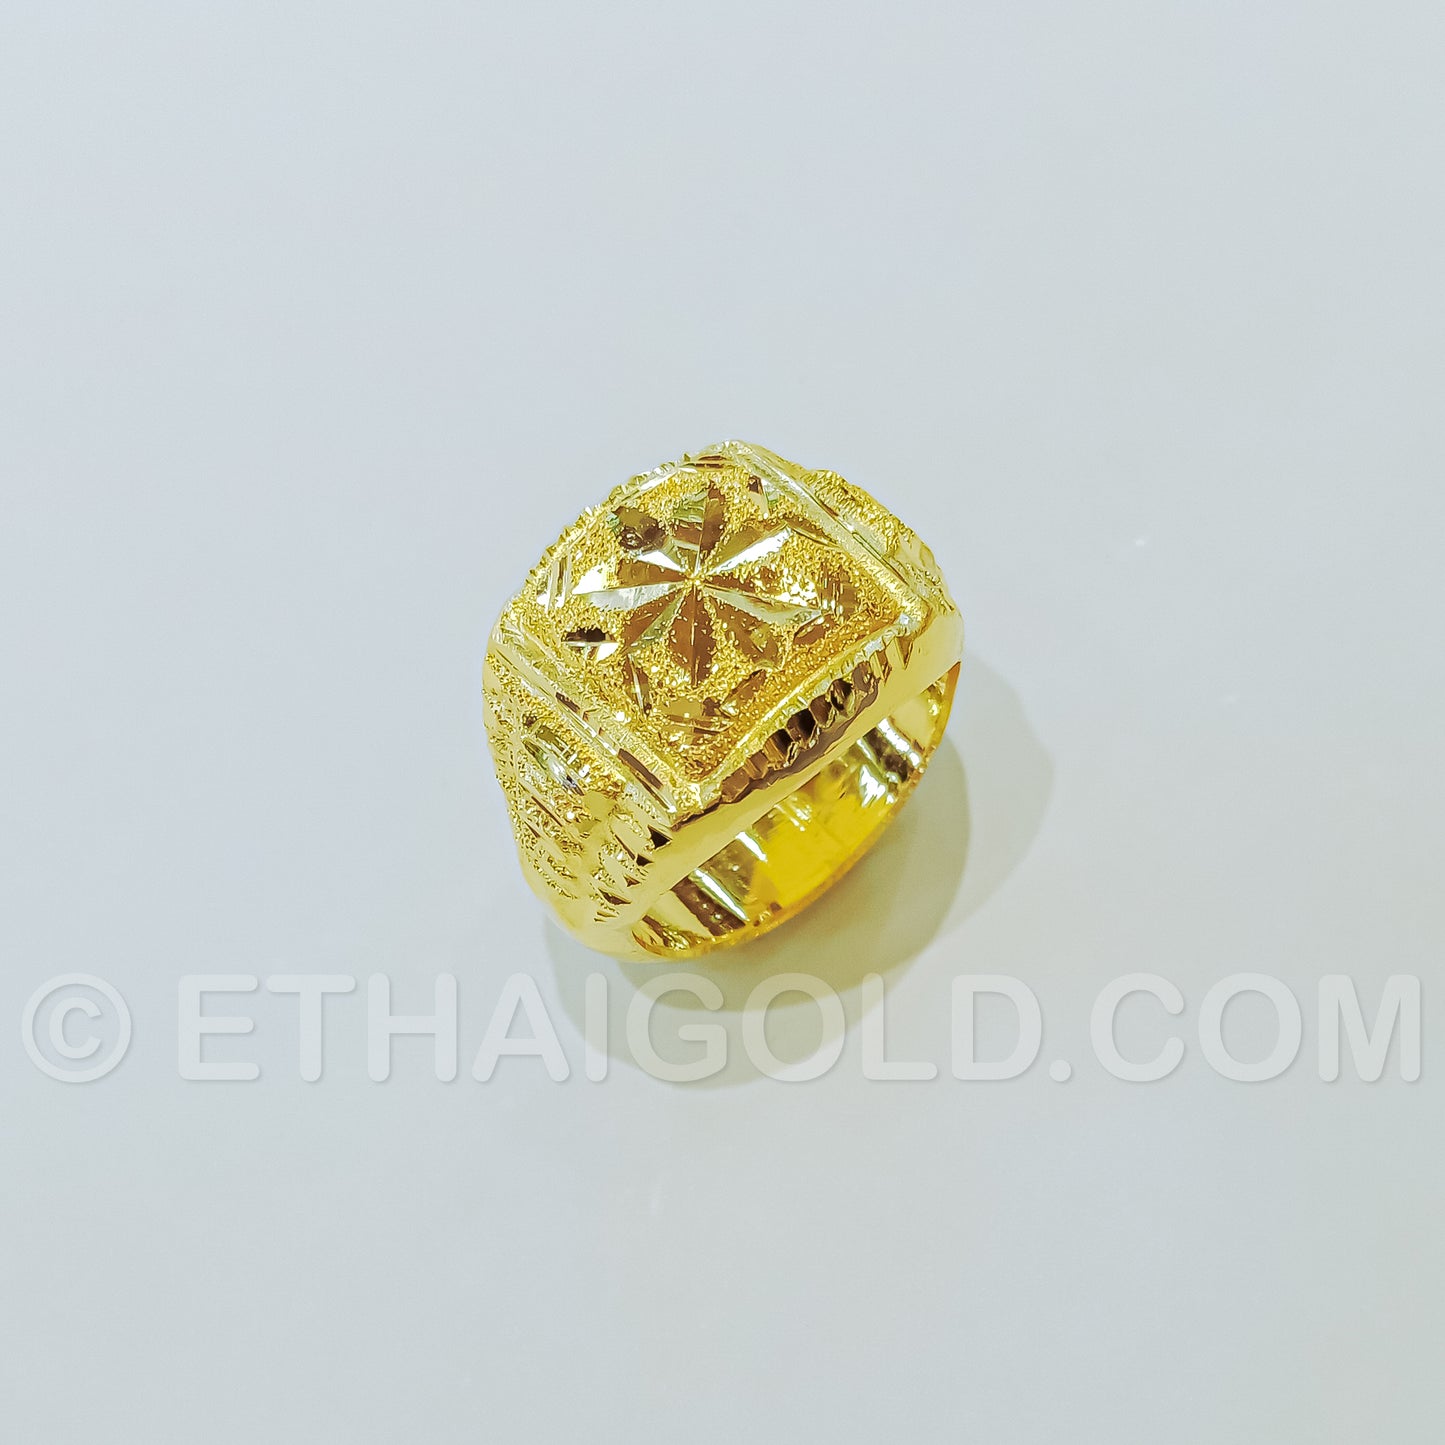 1/8 BAHT POLISHED SPARKLING DIAMOND-CUT HOLLOW SQUARE CLASSIC RING IN 23K GOLD (ID: R100HS)